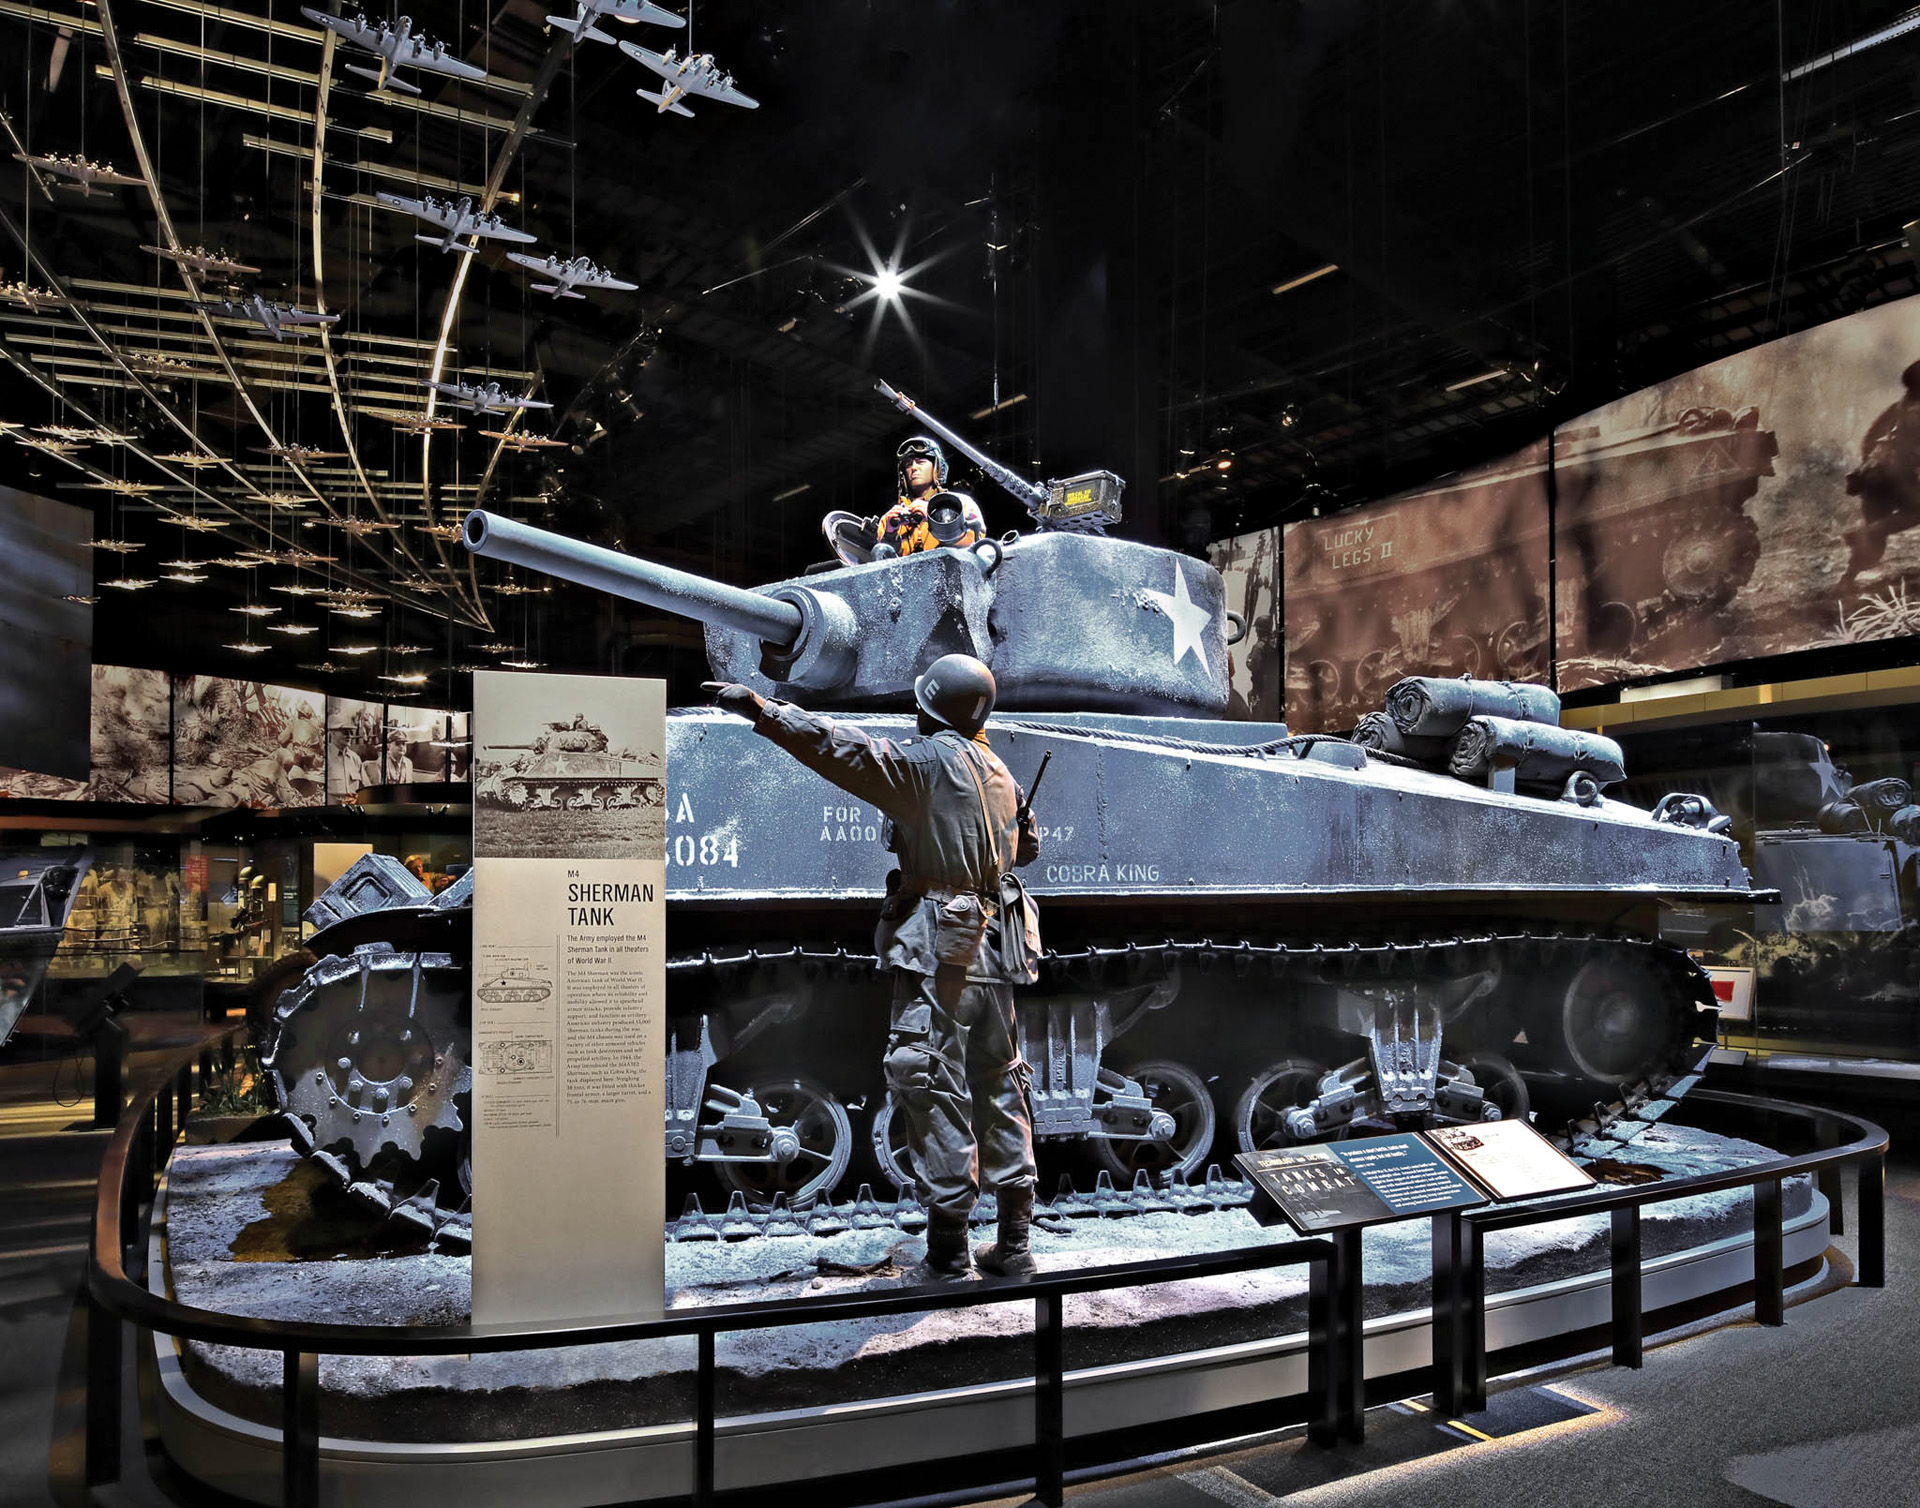 The M4 Sherman tank was the iconic American tank of World War II. 1st Lt. Charles P. Boggess, commanding officer of Company C, 37th Tank Battalion, led the attack from atop Cobra King—now in the Global War Gallery. 